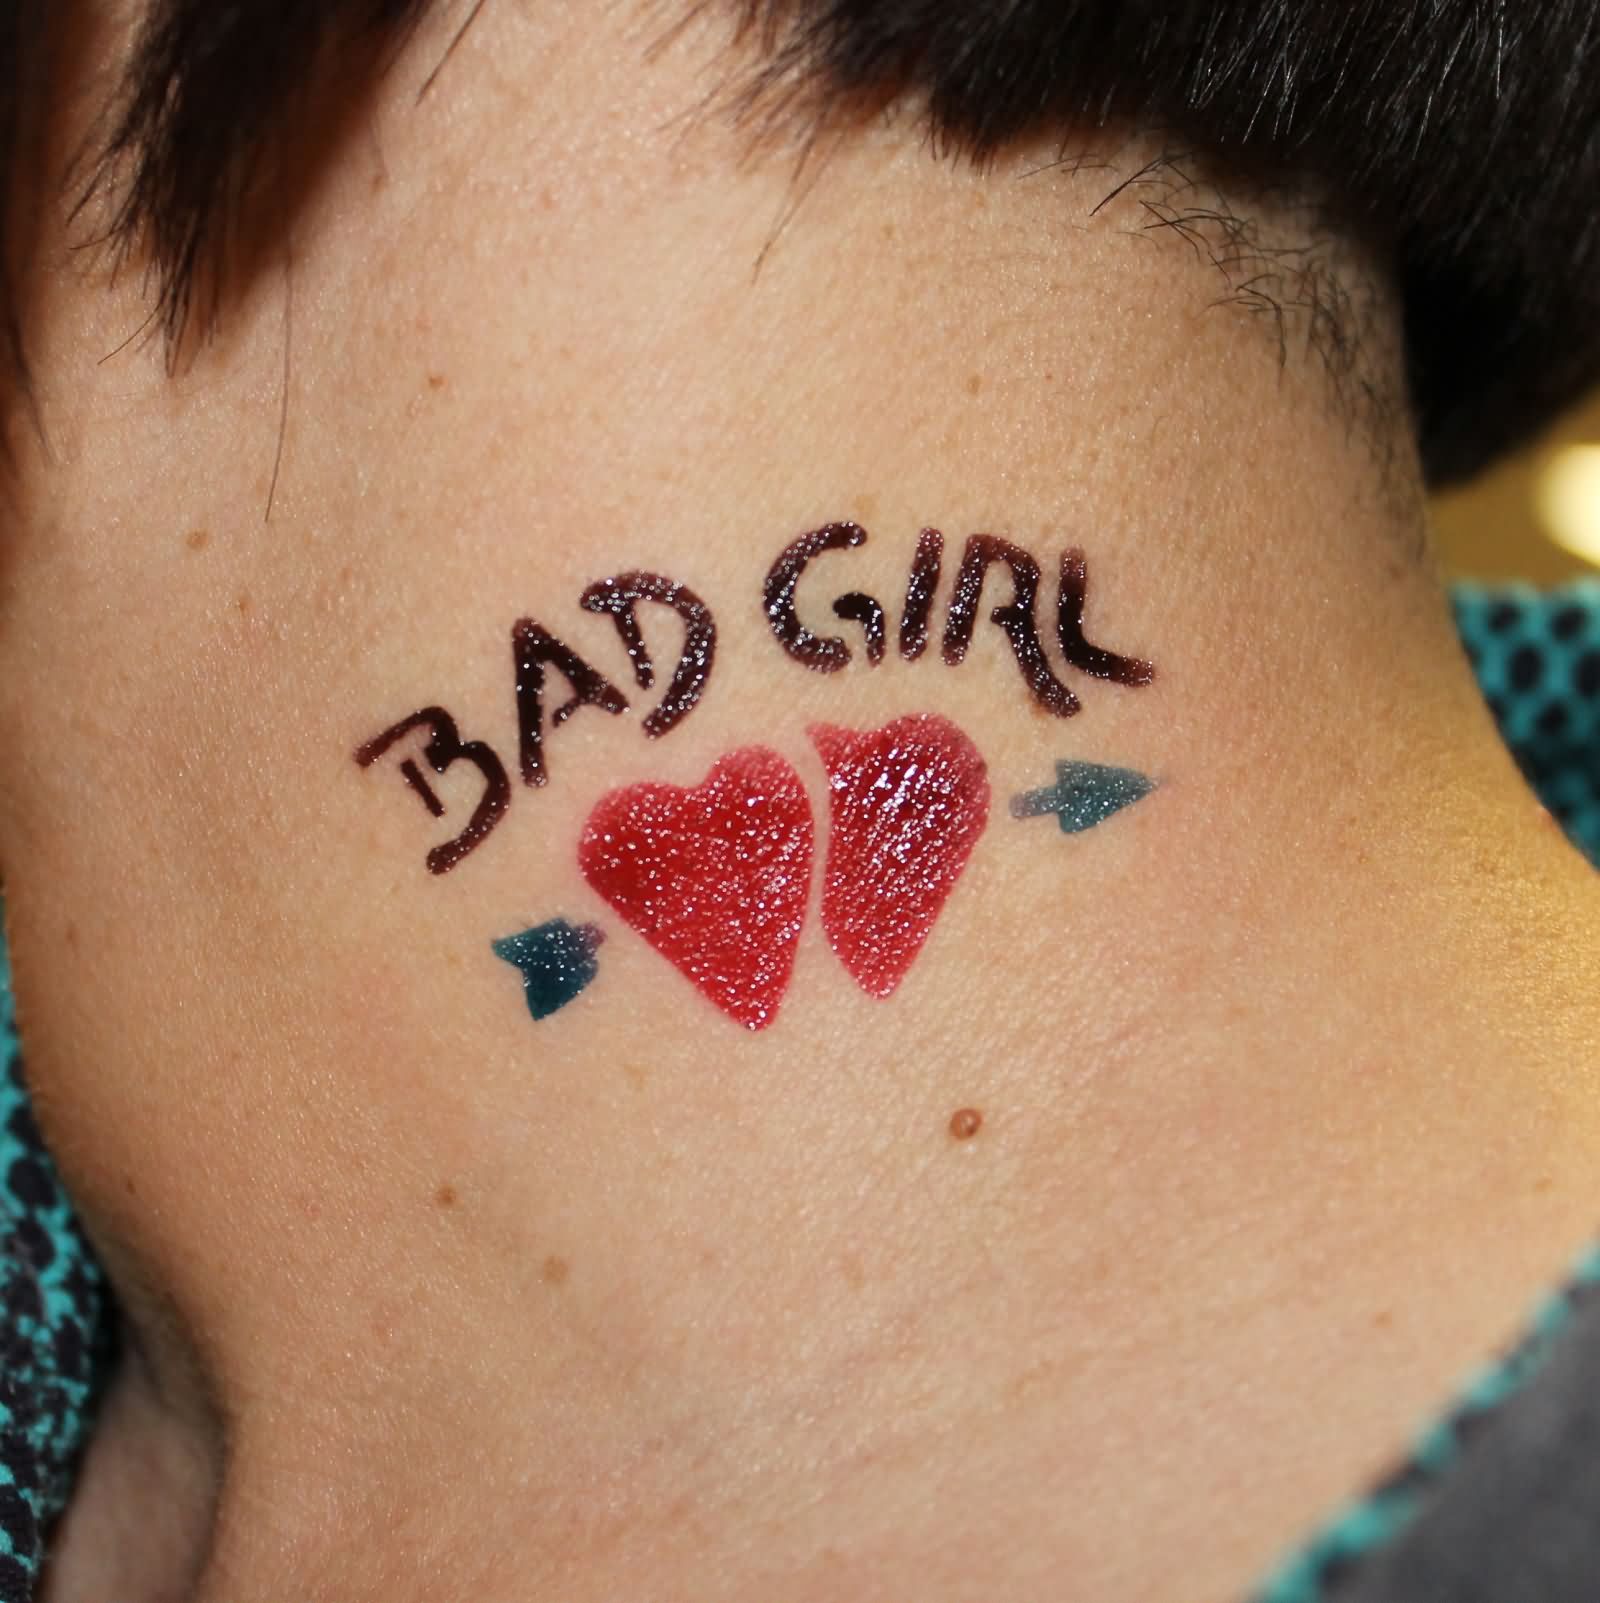 Bad Girl - Airbrush Arrow In Two Hearts Tattoo On Man Side Neck